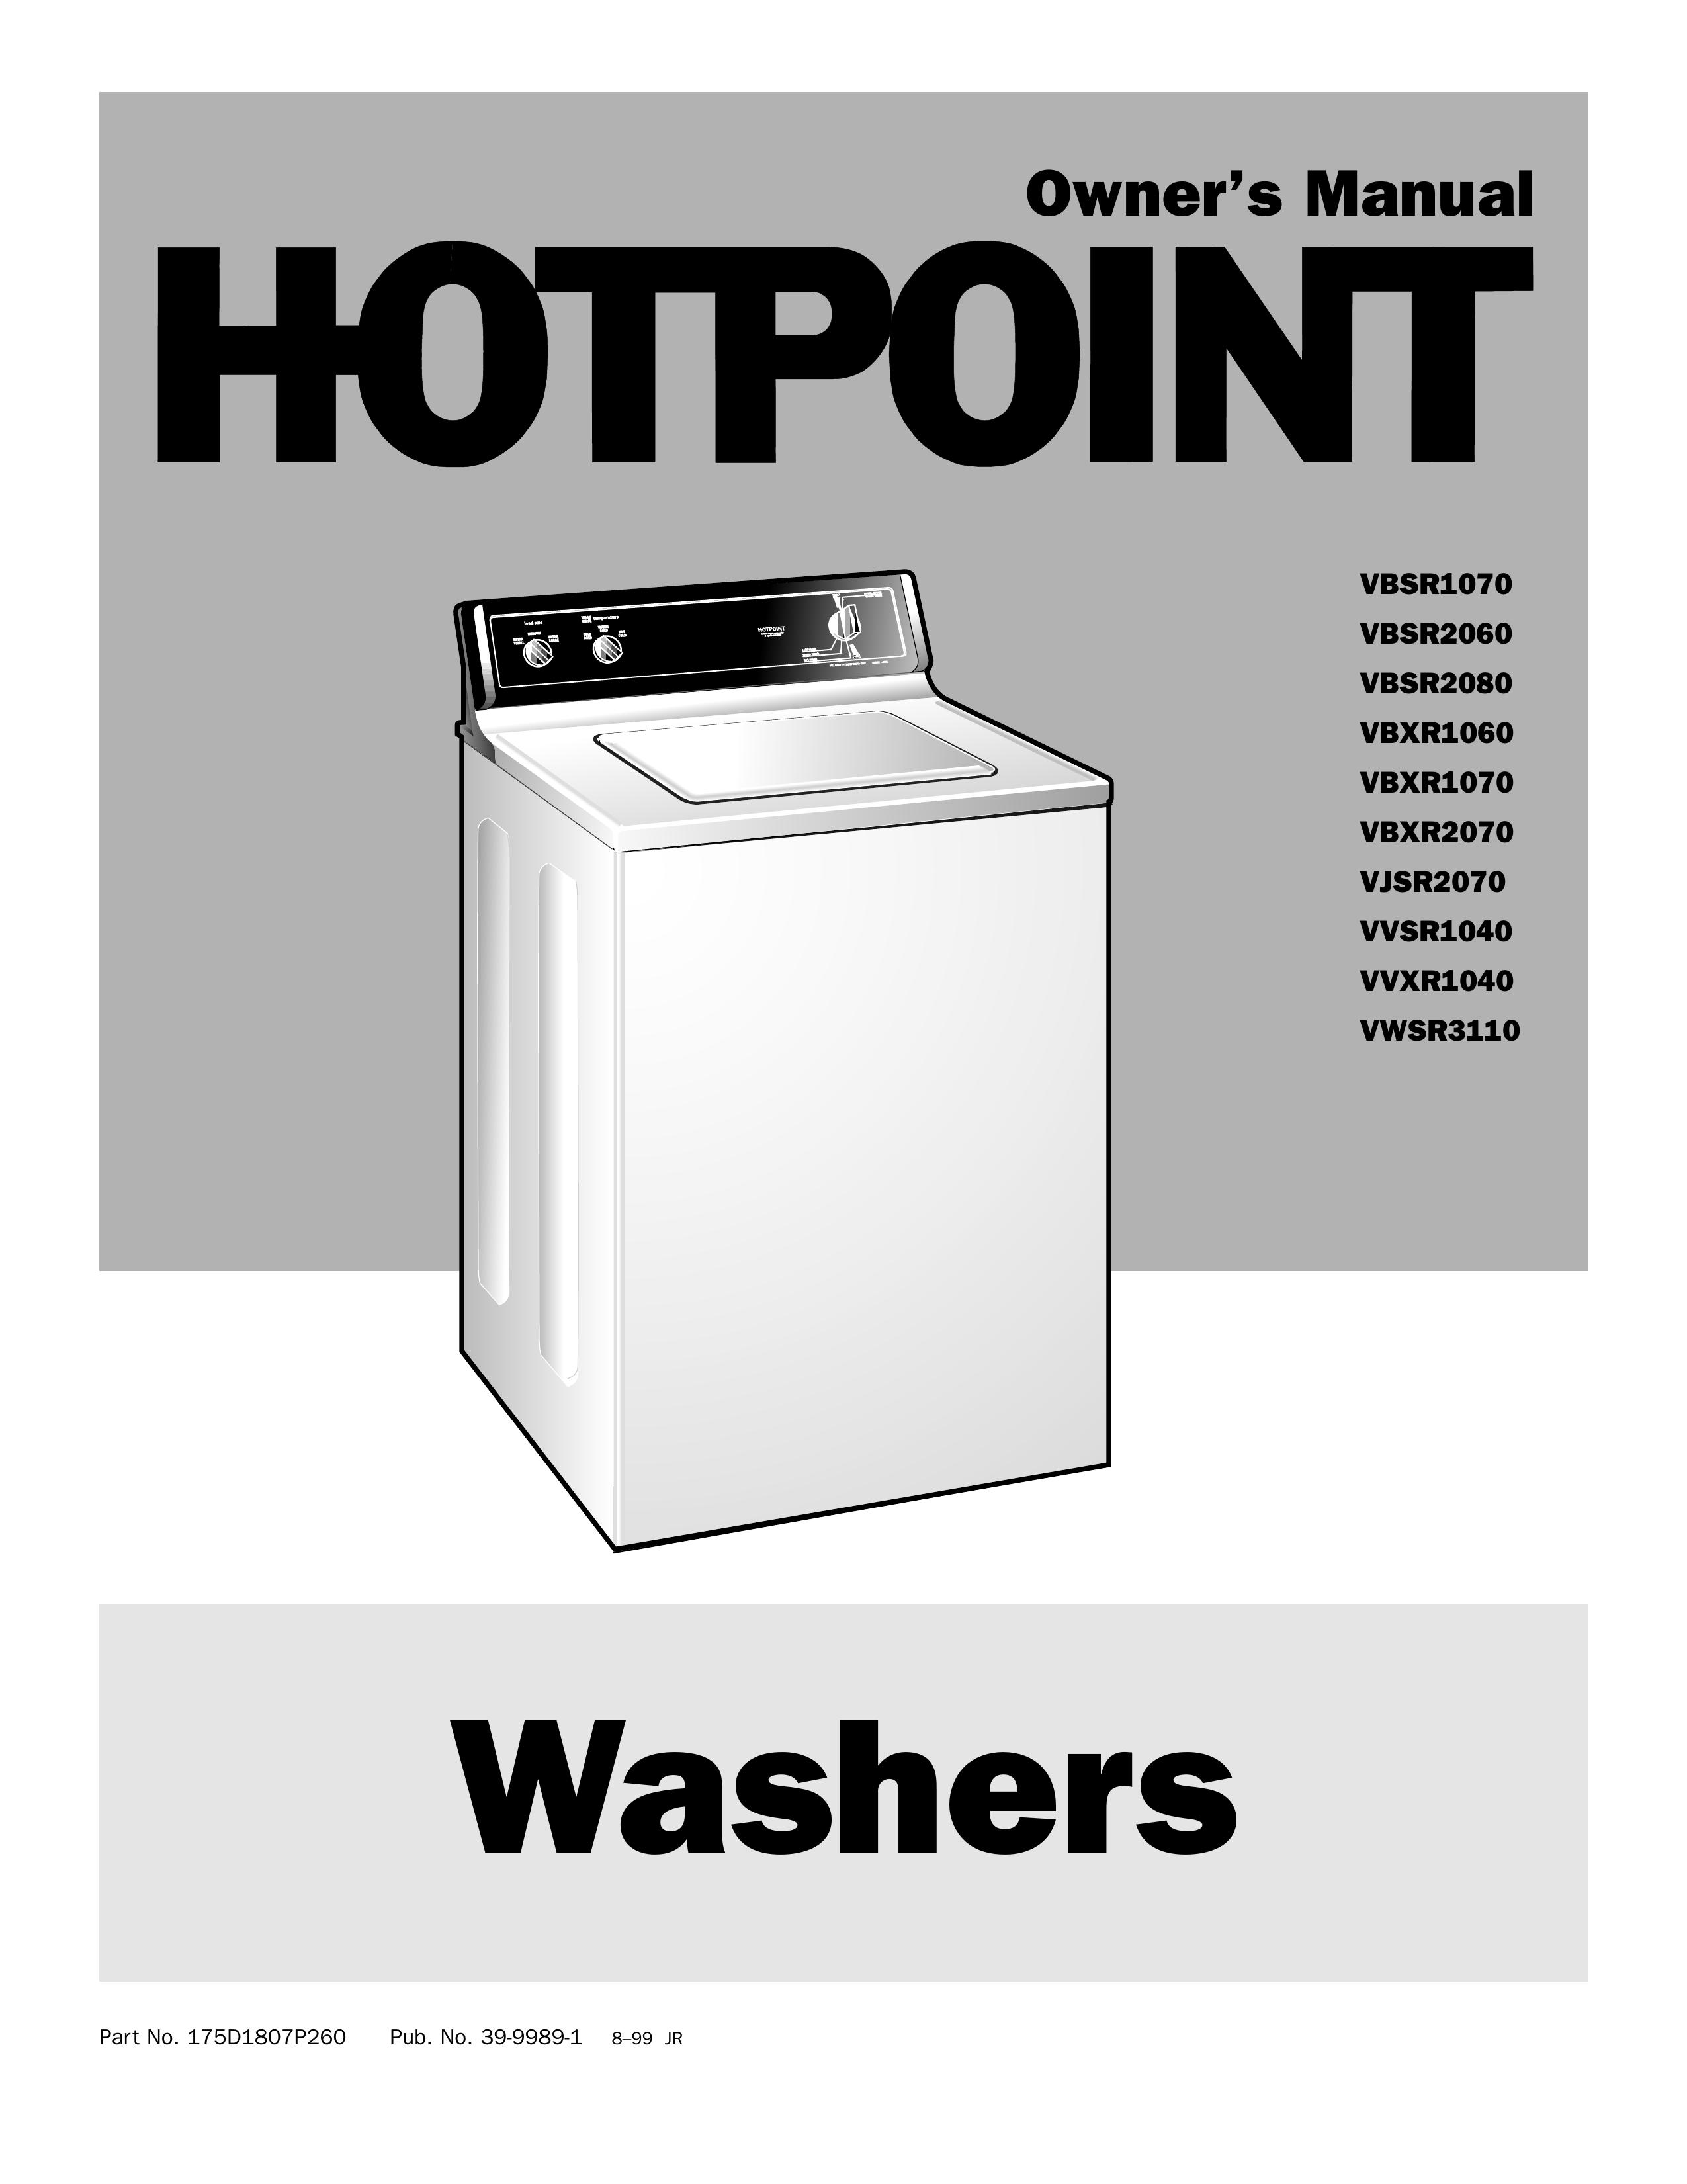 Hotpoint VBSR2060 Washer/Dryer User Manual